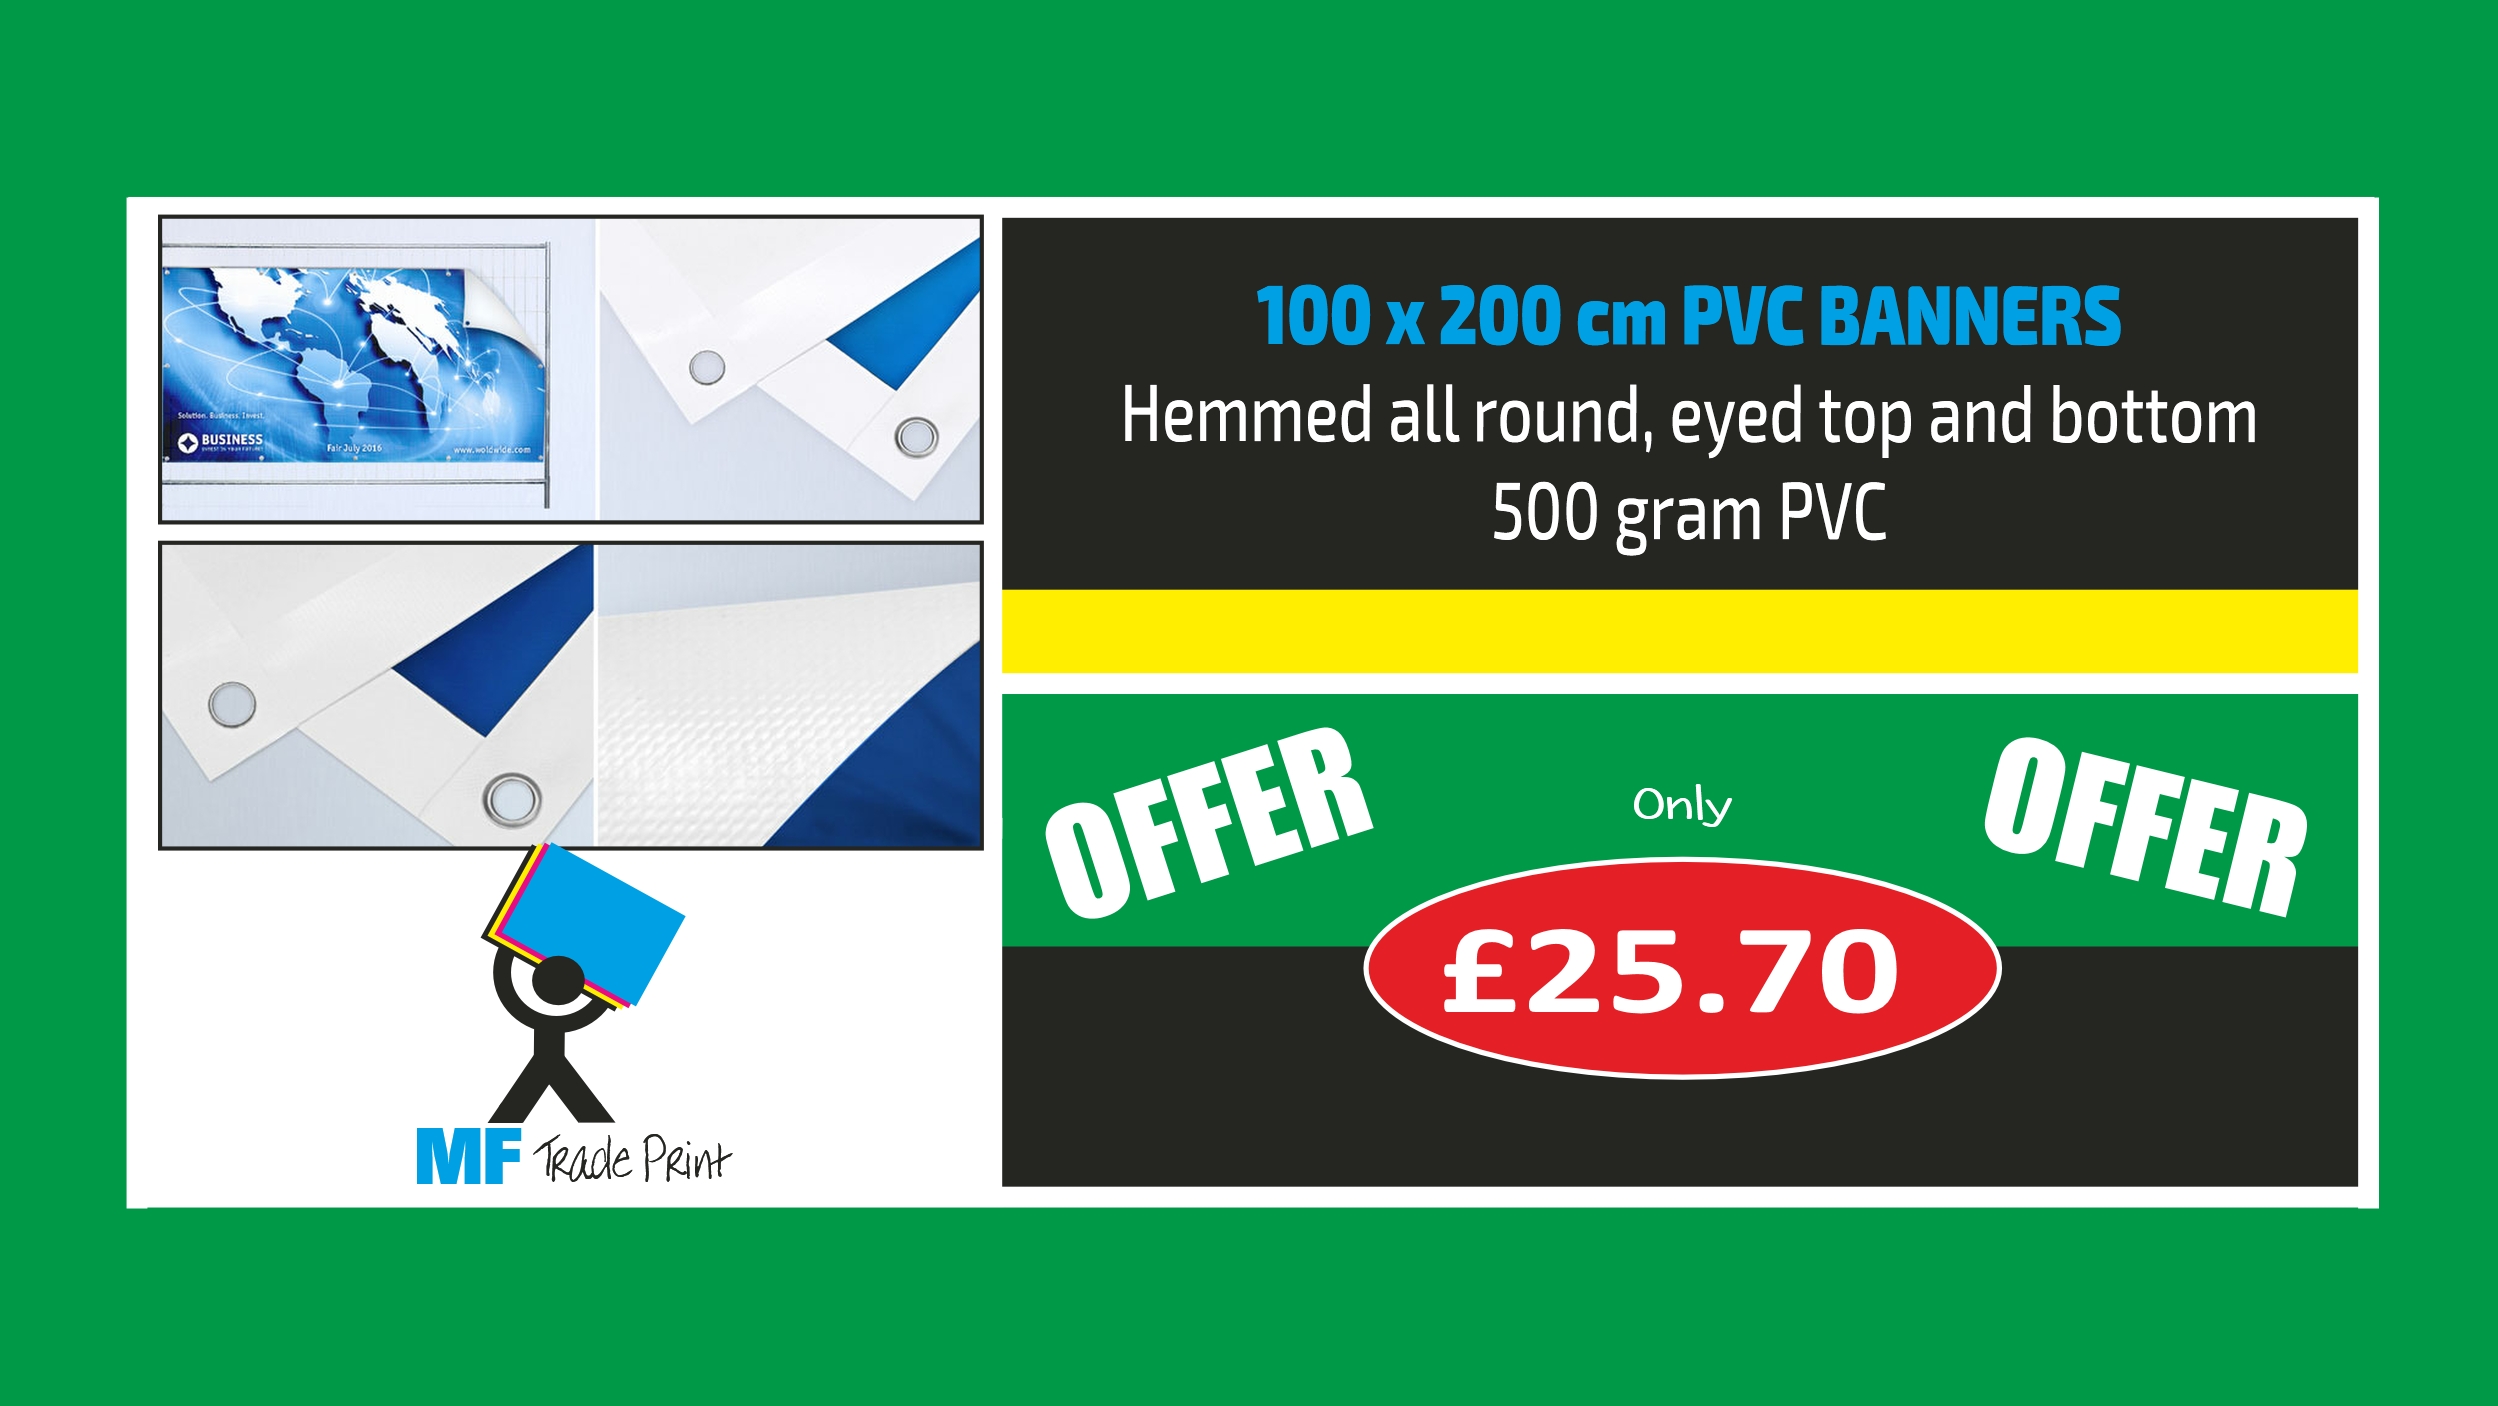 100 x 200 cm pvc banners on offer